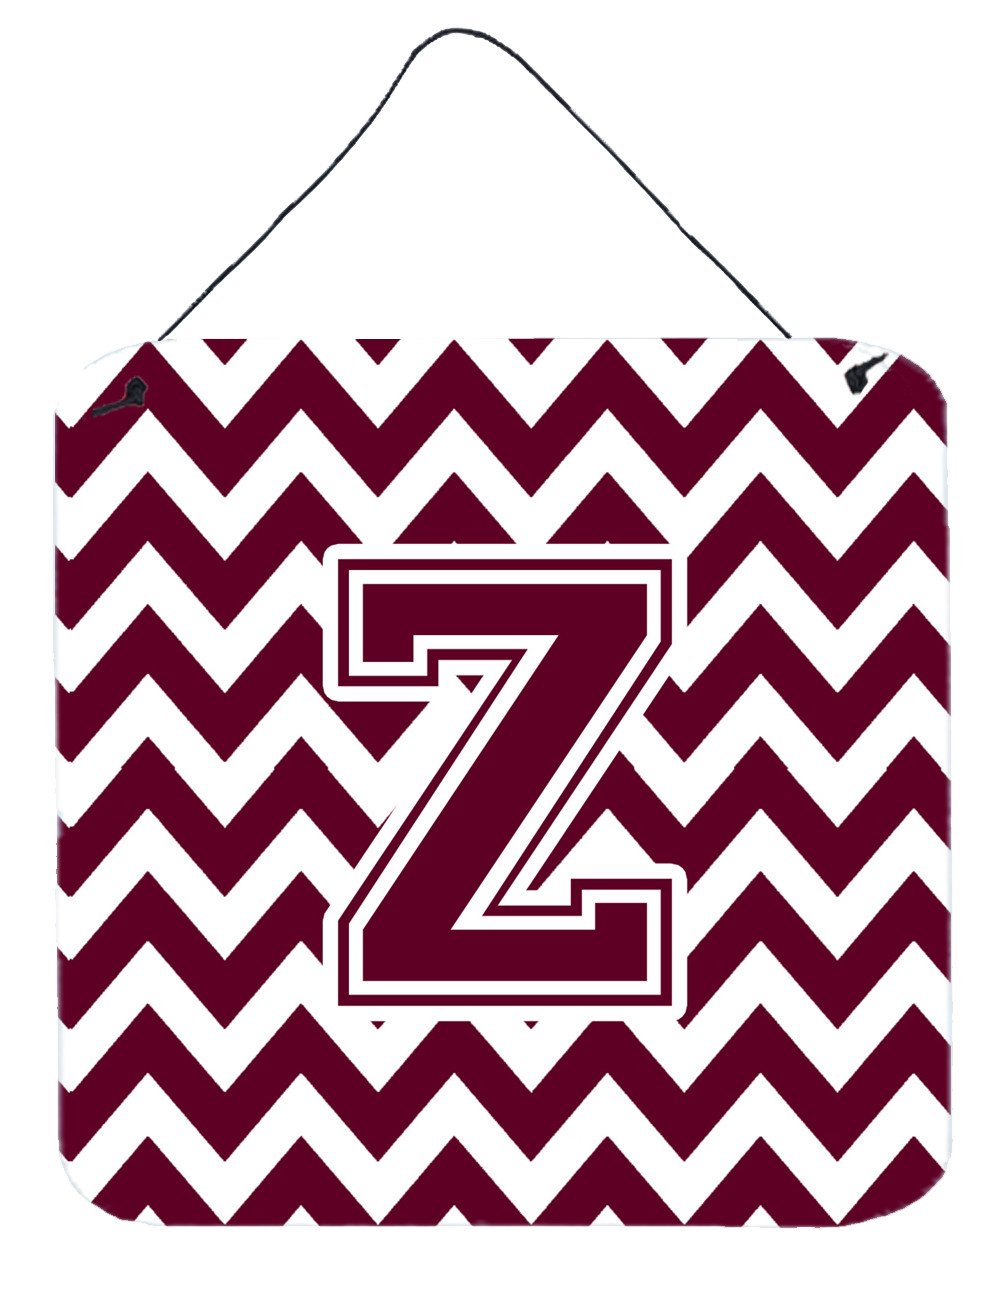 Letter Z Chevron Maroon and White  Wall or Door Hanging Prints CJ1051-ZDS66 by Caroline's Treasures